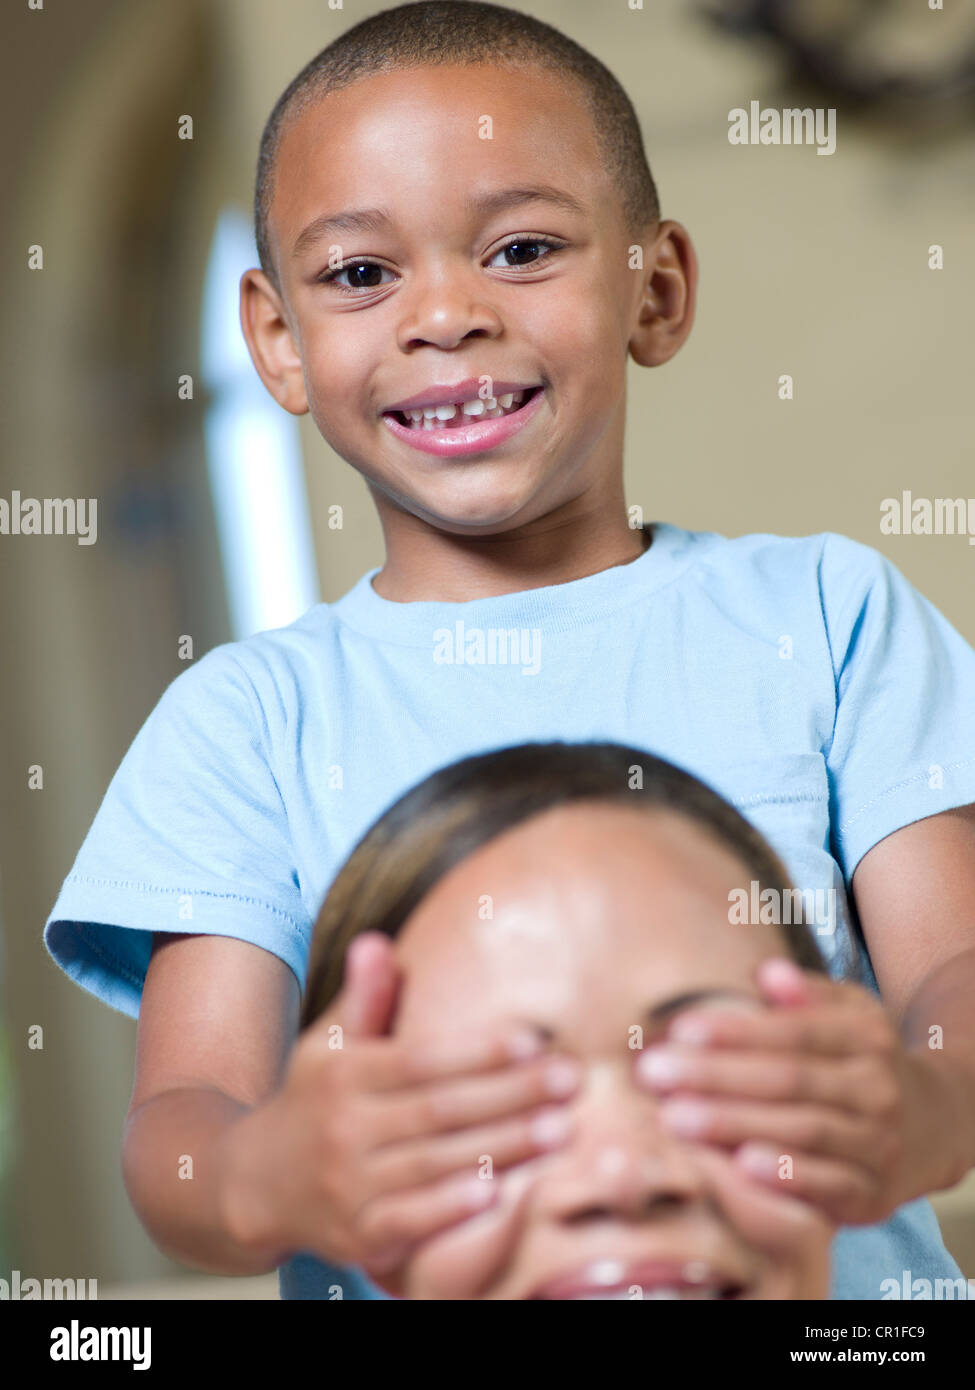 Smiling boy covering mothers eyes Stock Photo